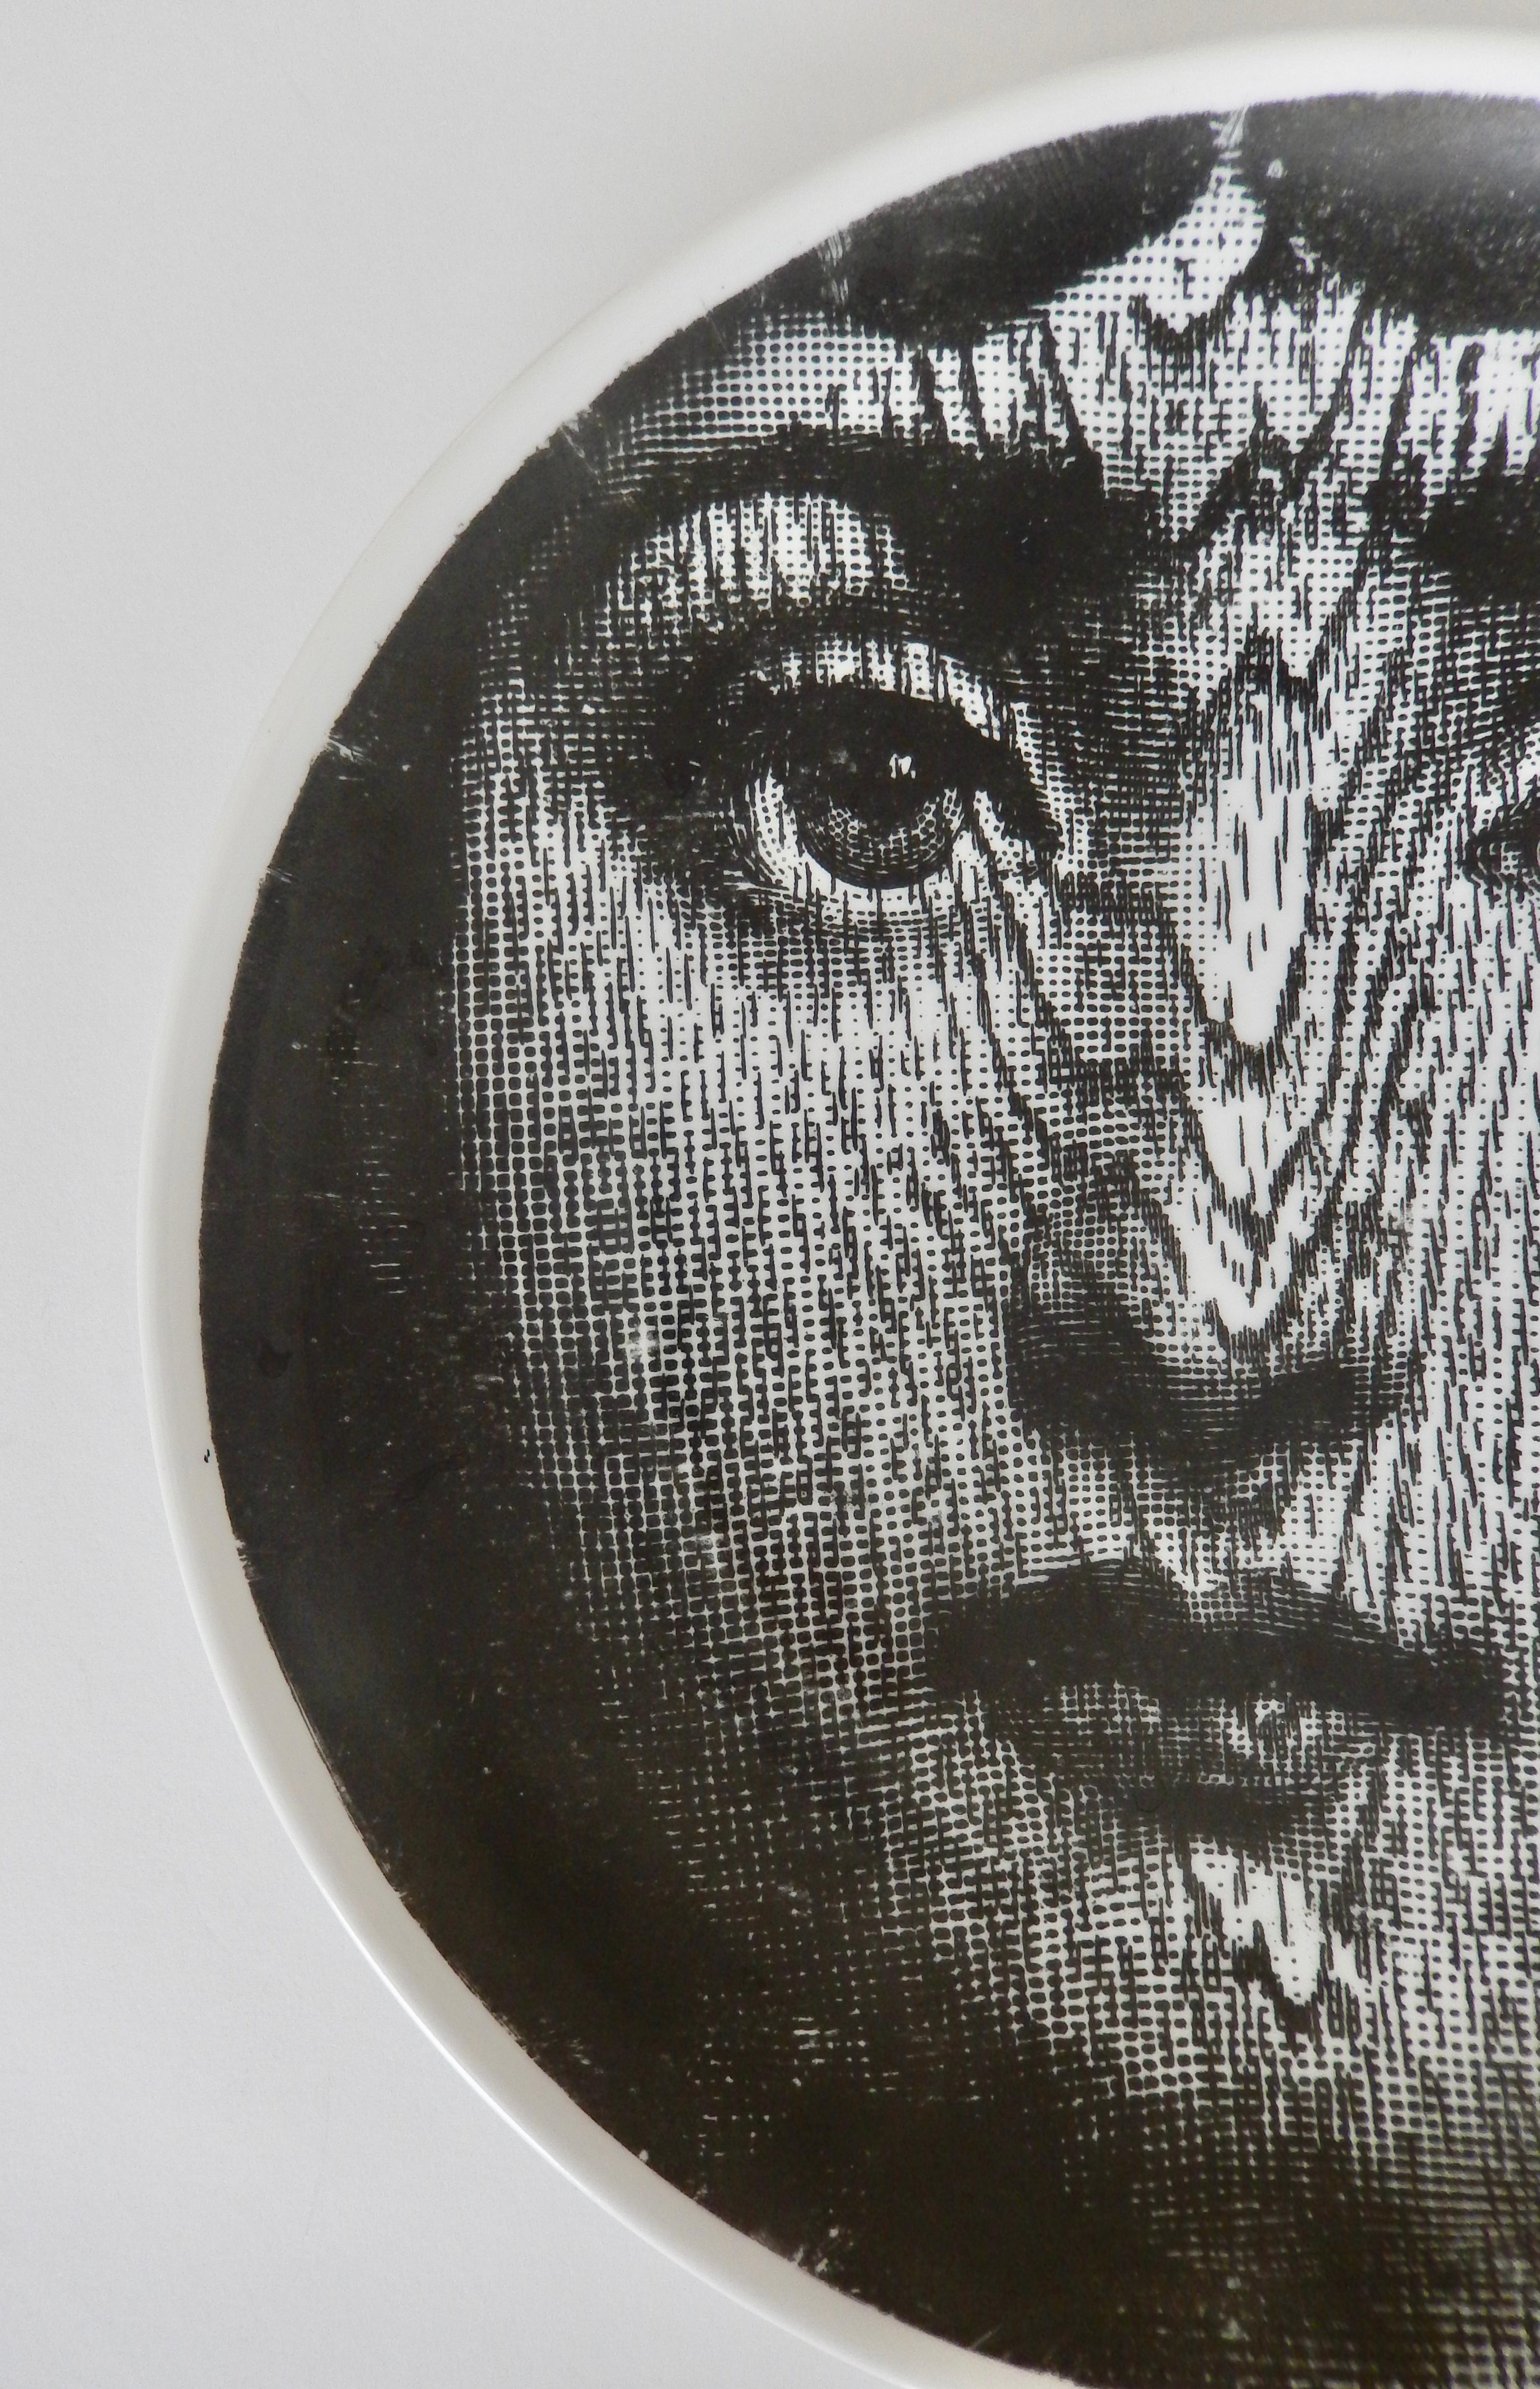 Modern Midcentury Fornasetti Face Plate, Tema e Variazione N90 For Sale